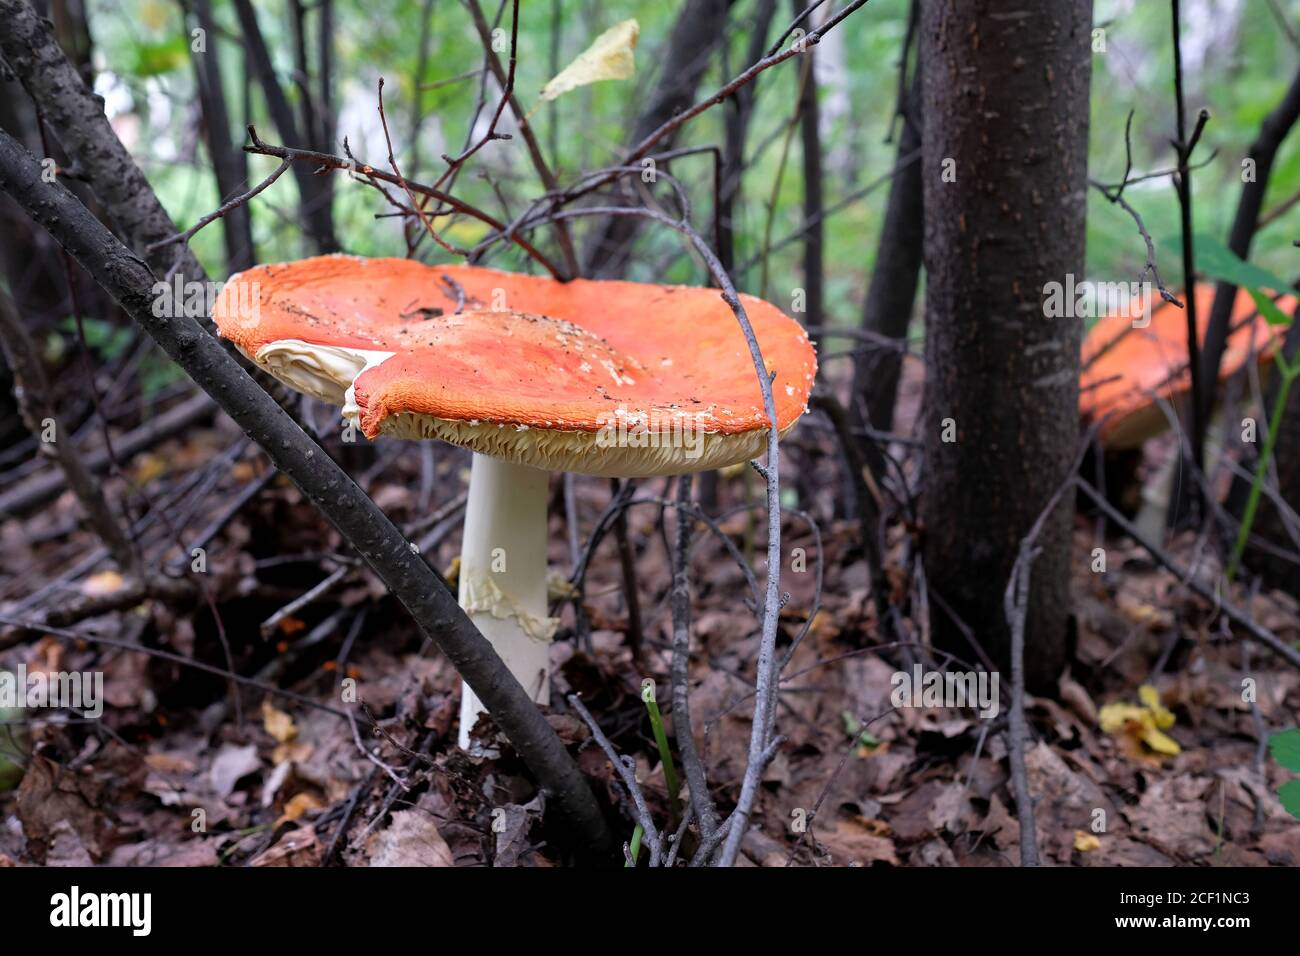 Amanita in the forest. A large poisonous mushroom in the forest. Branches, leaves, dark background are visible. Stock Photo